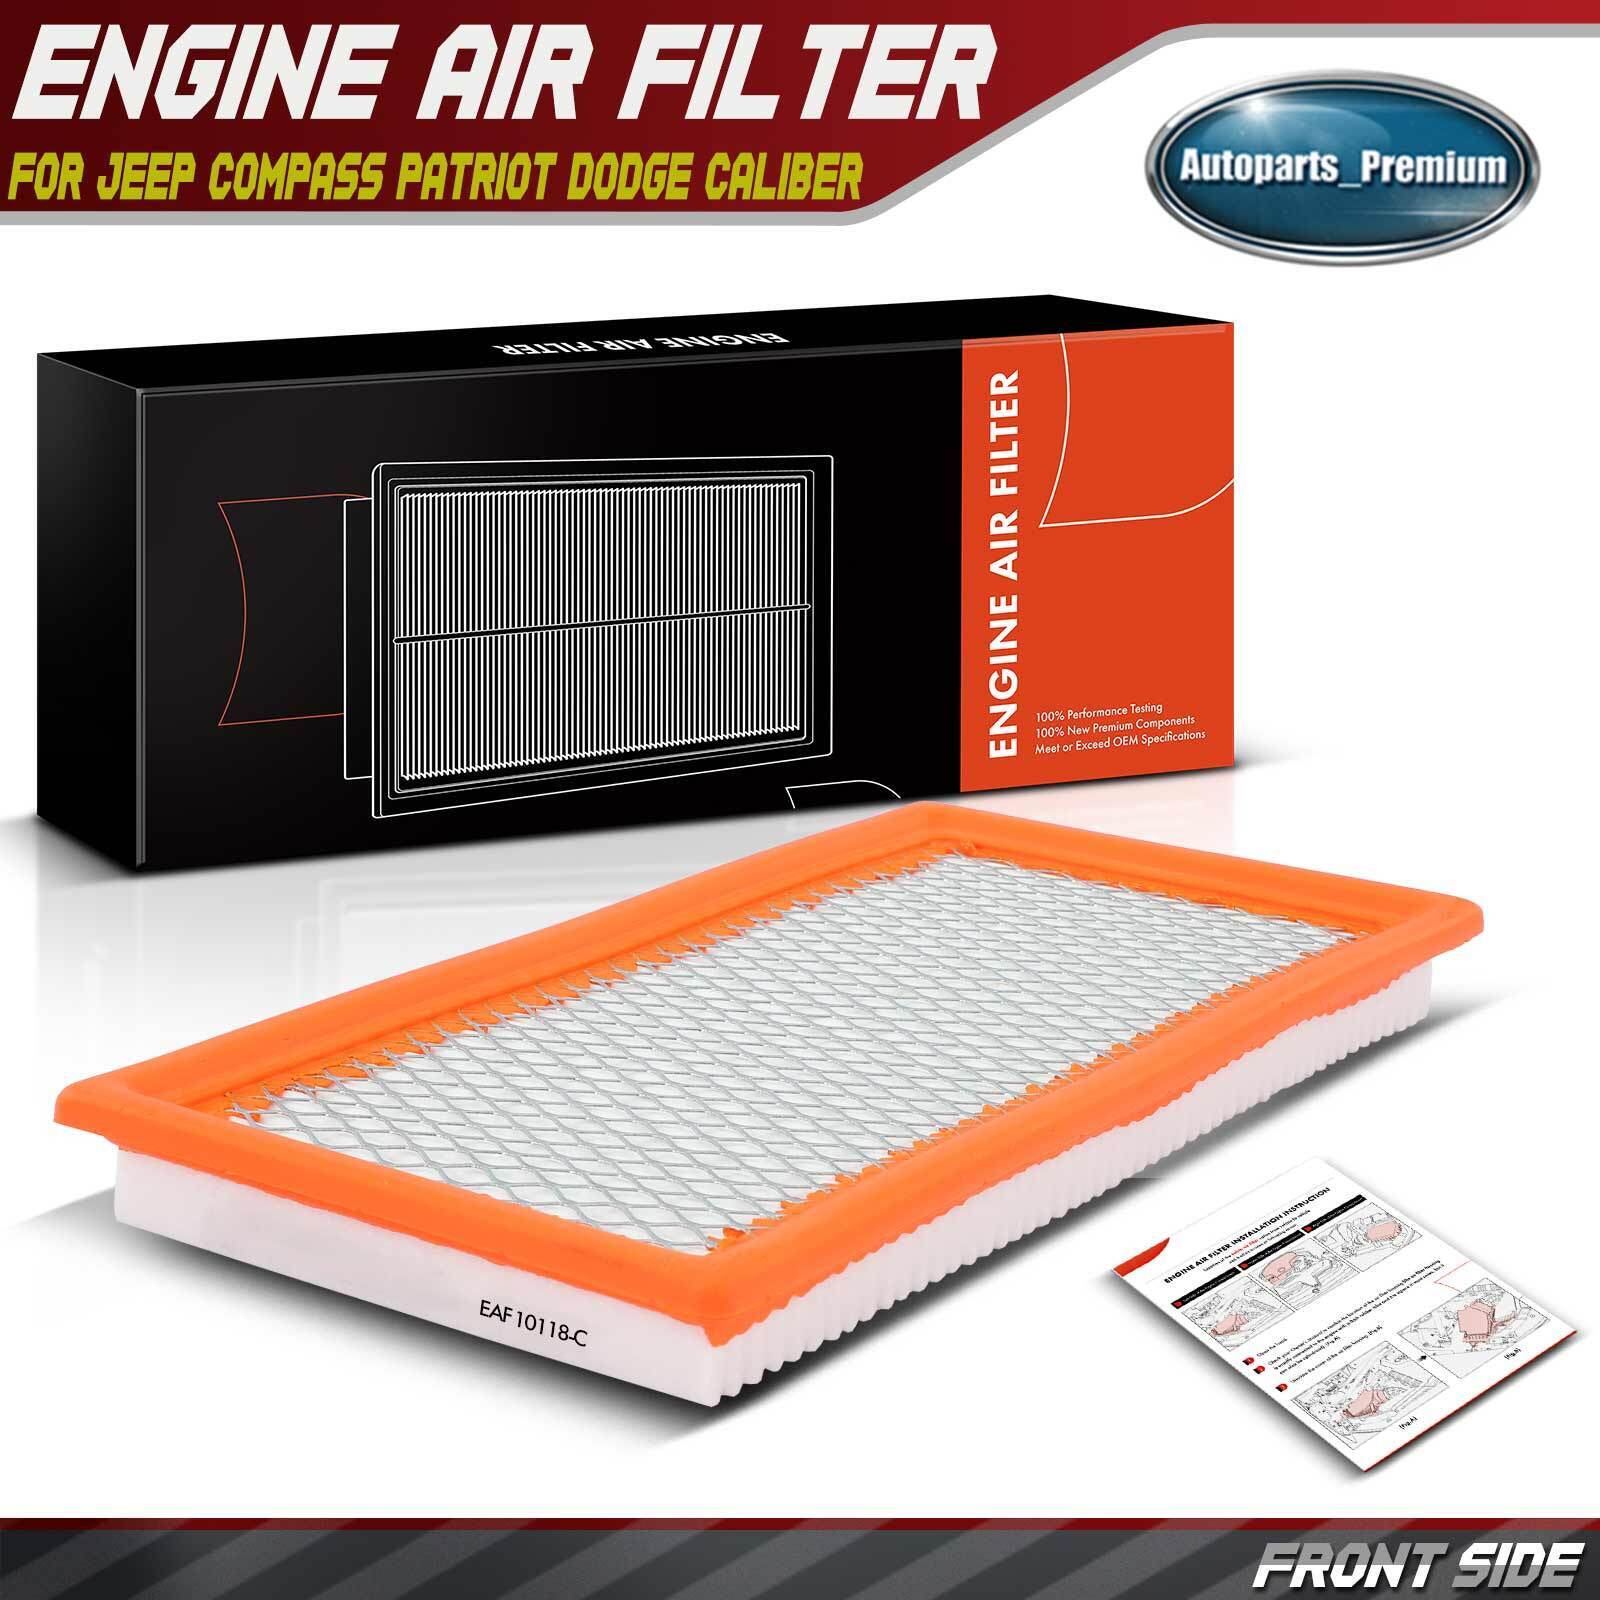 New Engine Air Filter for Jeep Compass Patriot Dodge Caliber 2007 2008 2009 2010